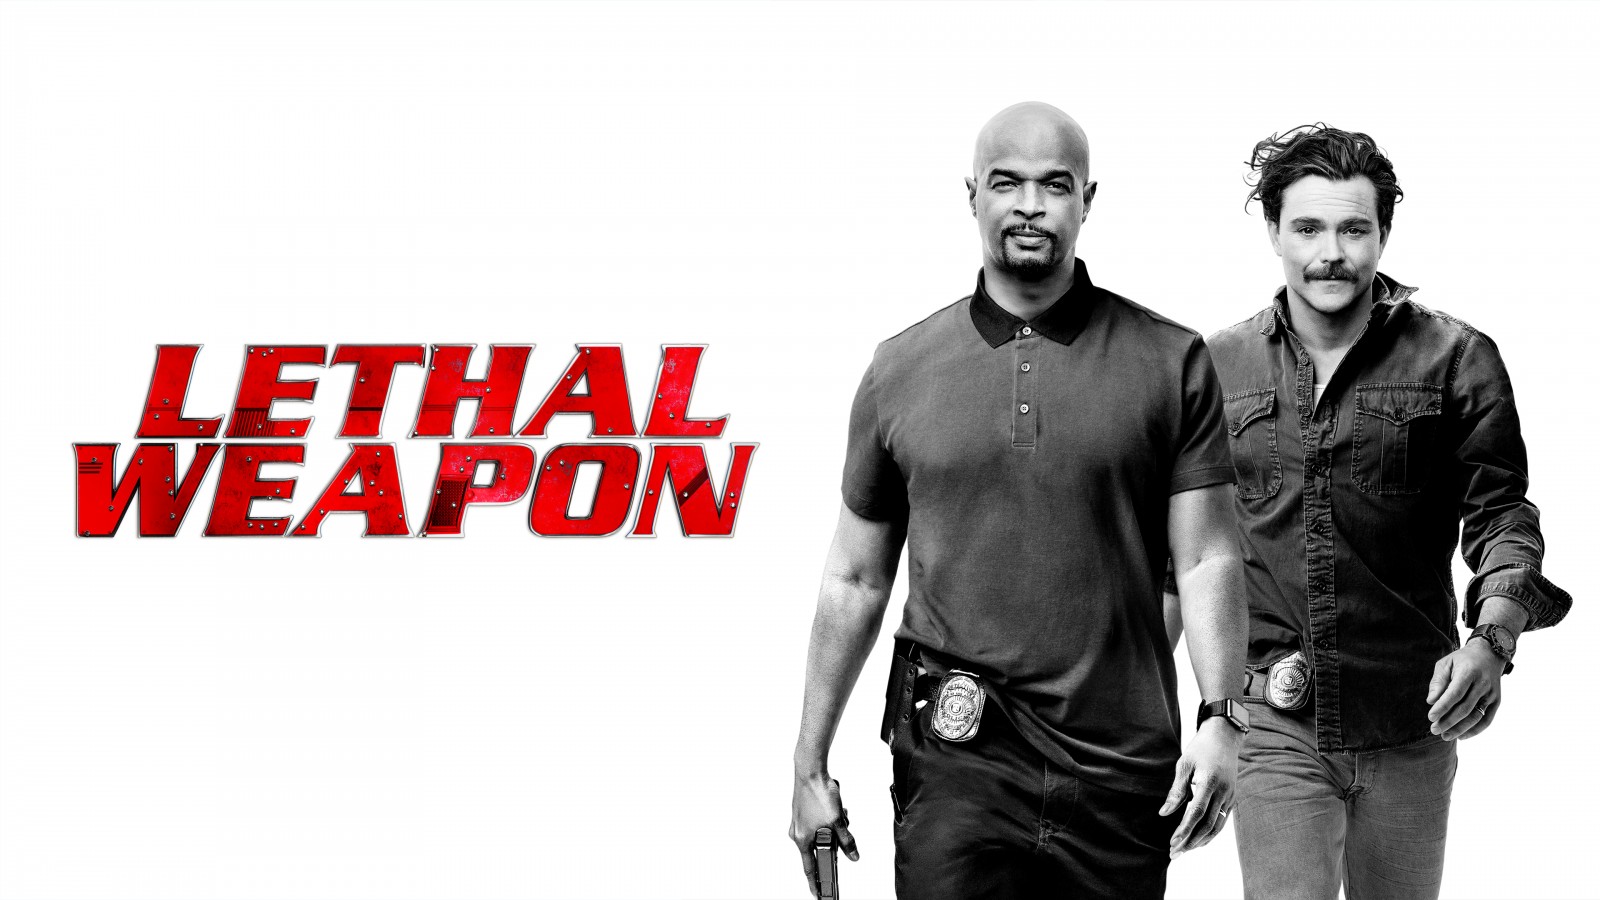 lethal weapon wallpaper,font,muscle,t shirt,photography,brand